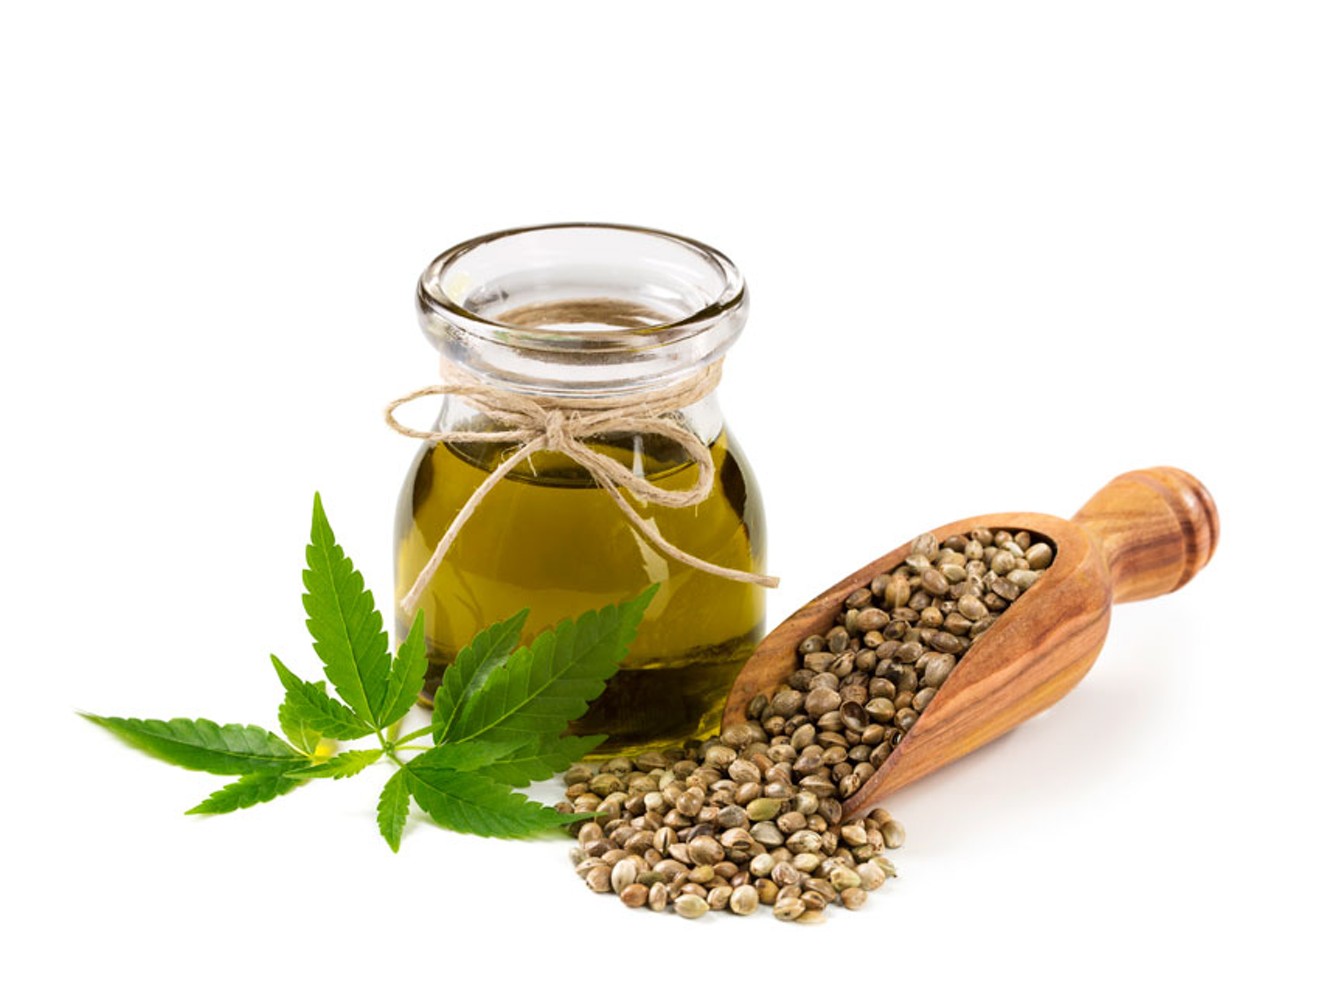 Cannabidiol isn't psychoactive and can be purchased by people of all ages if it's derived from hemp.